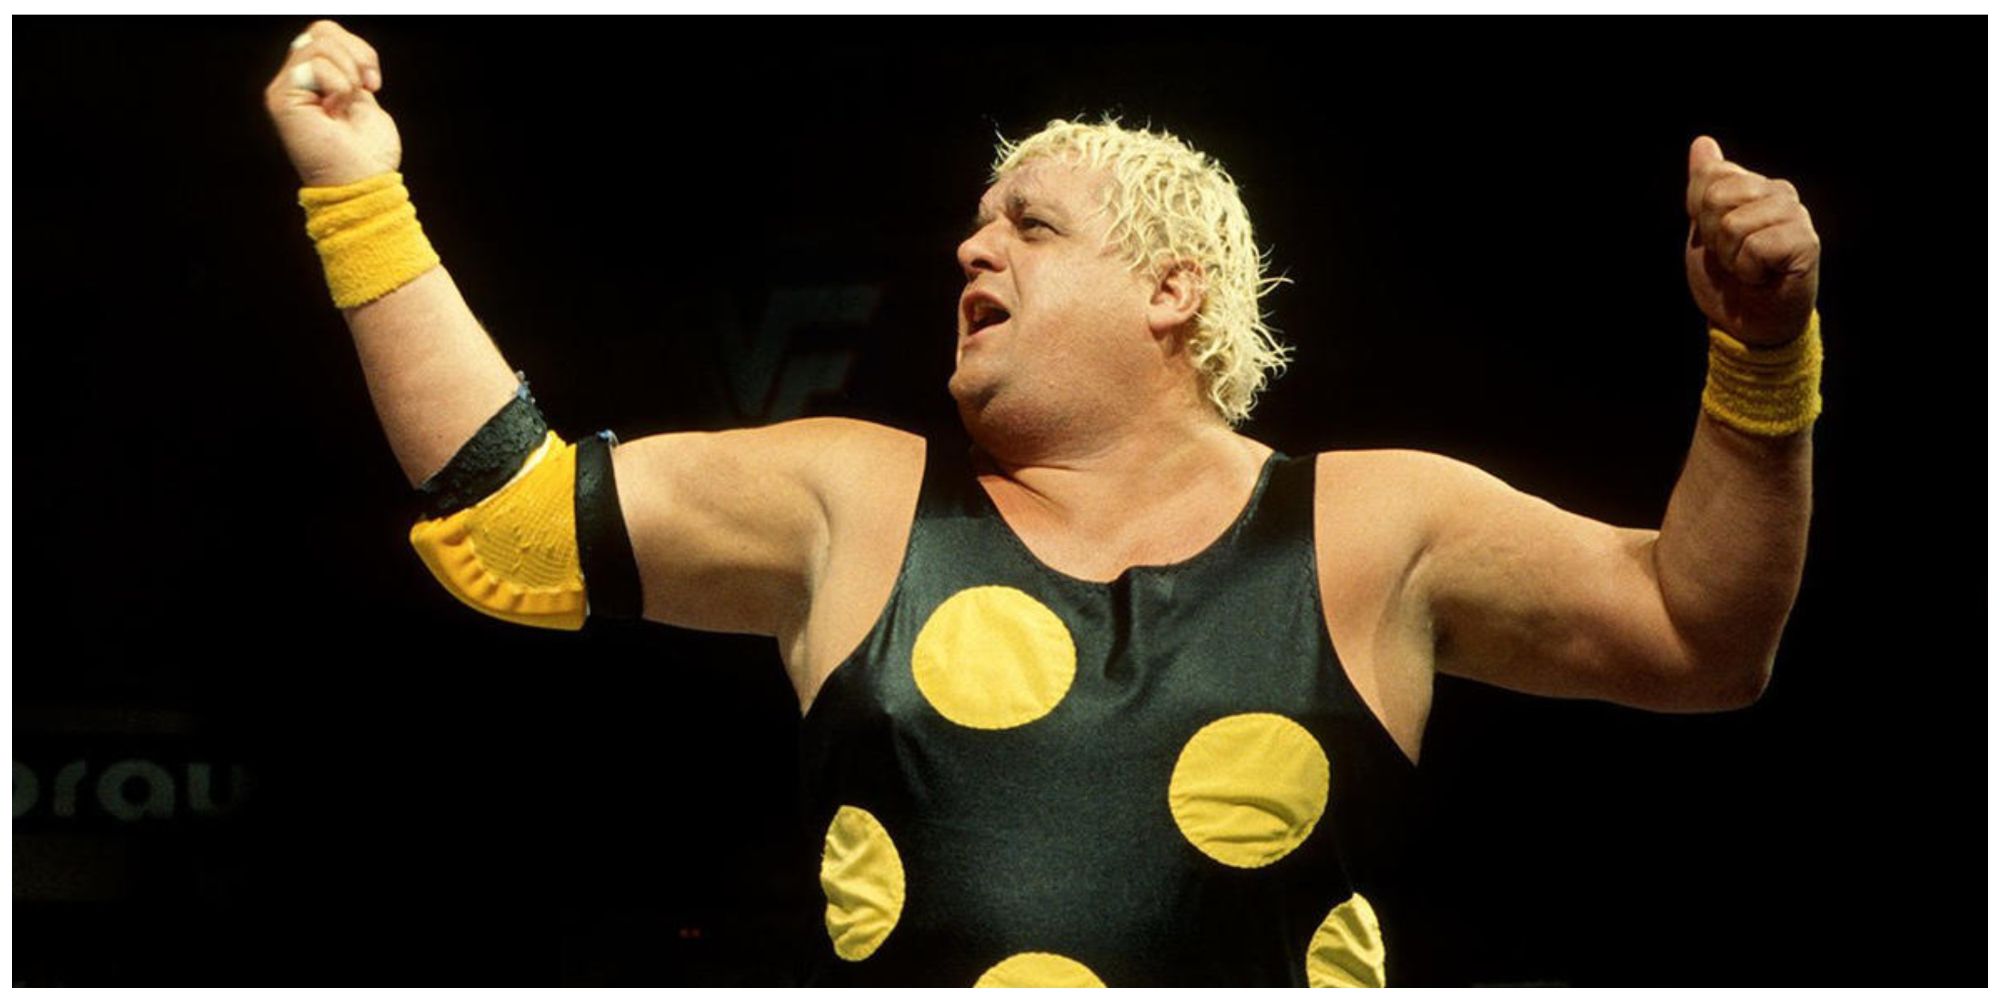 Dusty Rhodes in his polka-dot suit addressing the crowd with his arms in the air